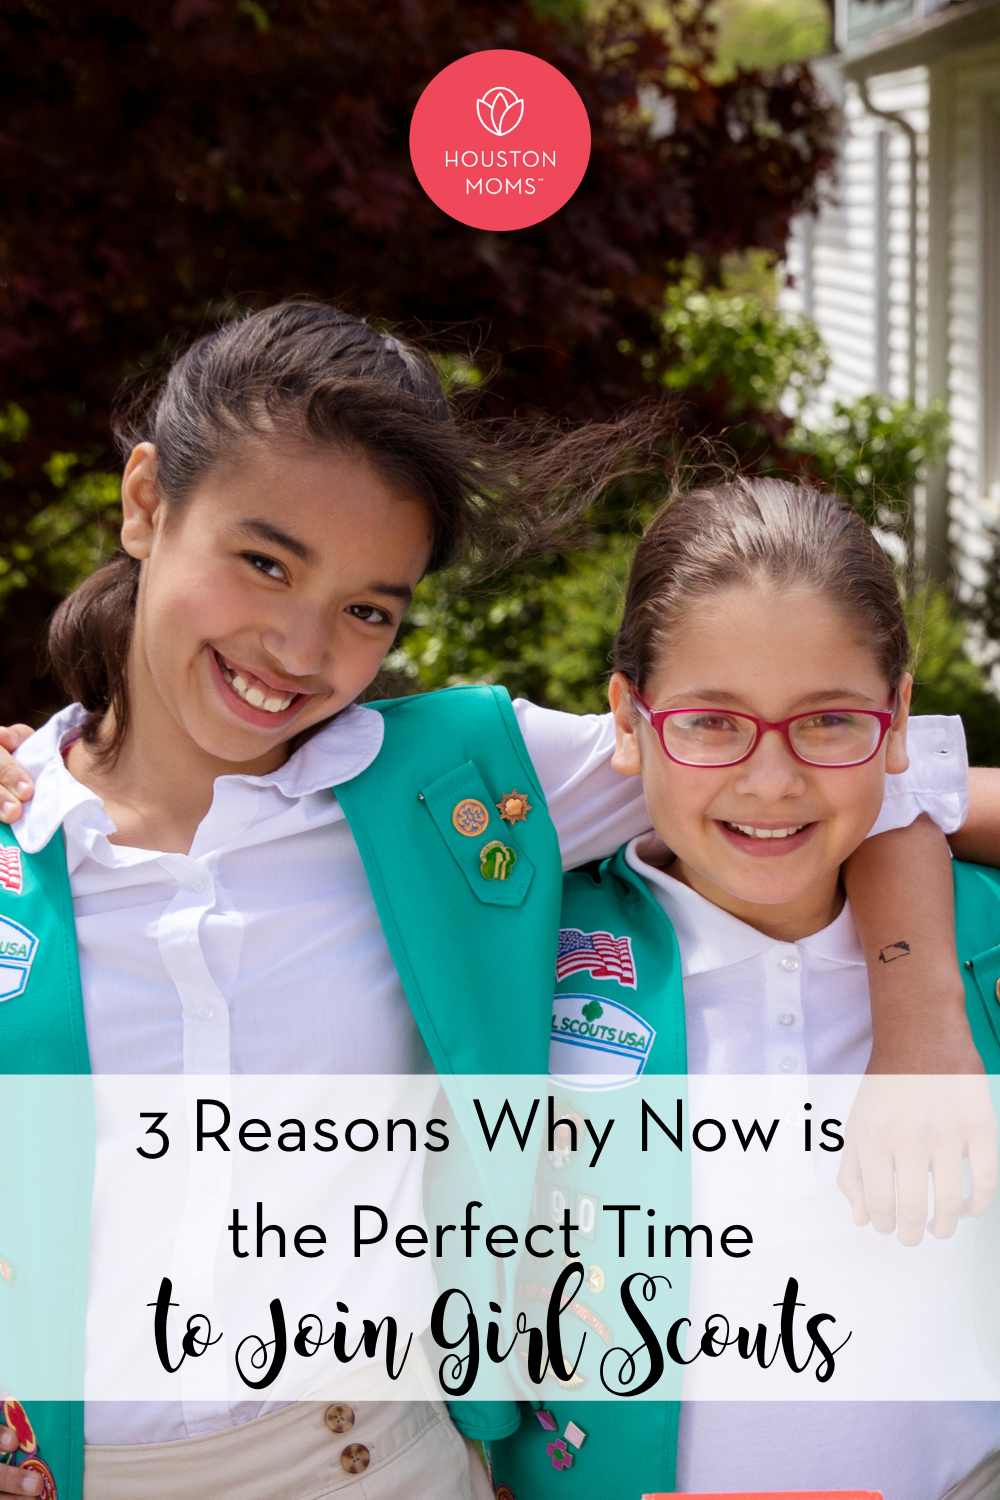 Houston Moms "3 Reasons Why Now is the Perfect Time to Join Girl Scouts" #Houstonmoms #houstonmomsblog #momsaroundhouston